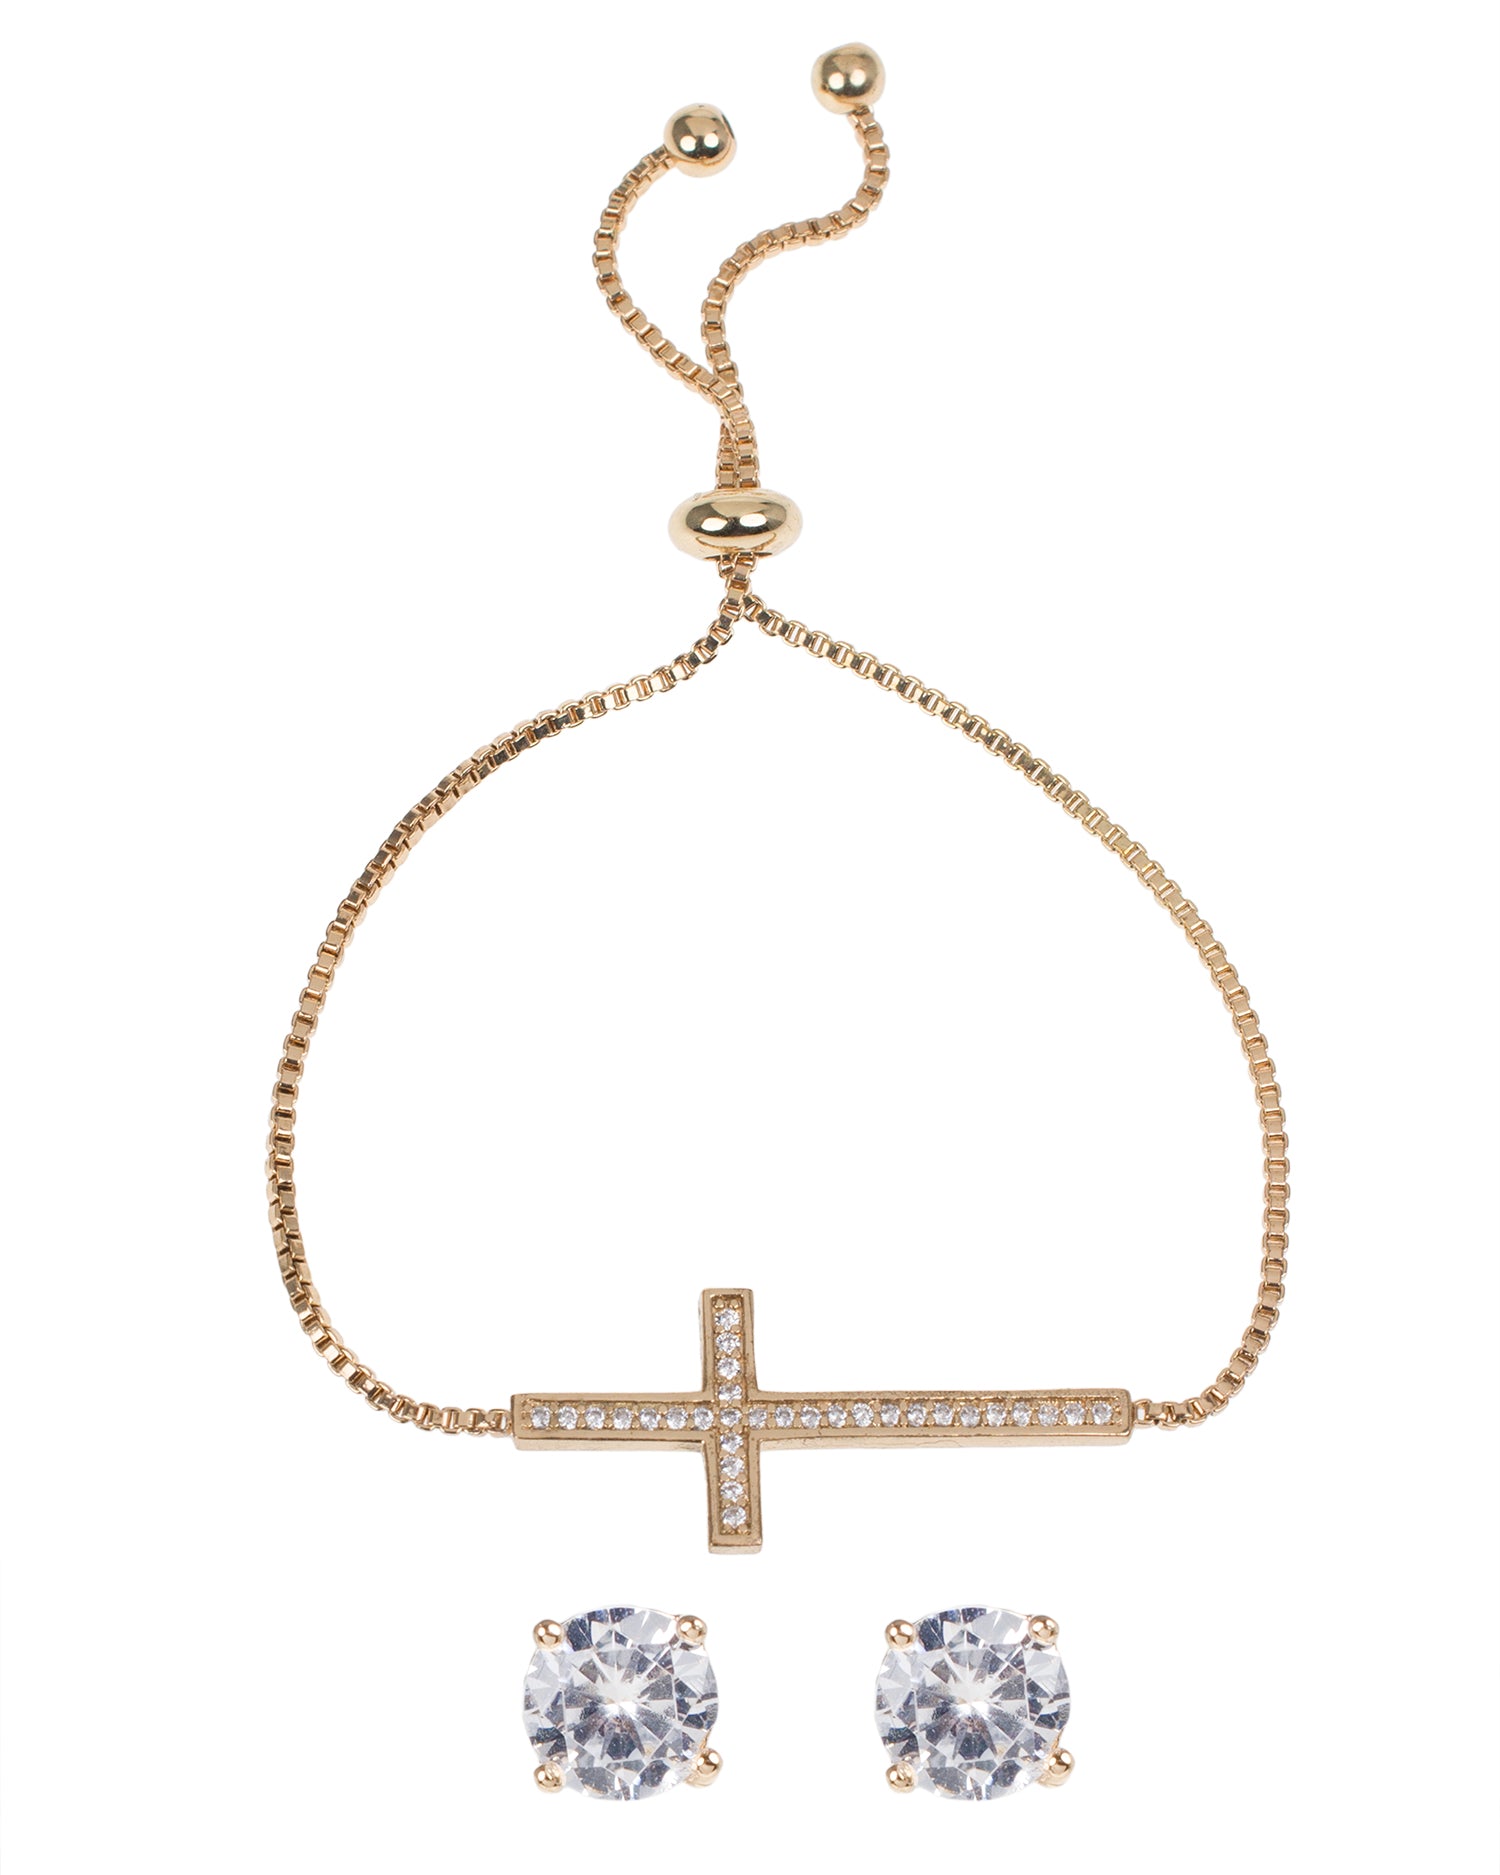 Pave CZ Cross Bolo Bracelet with Round Stud Earring Set in Yellow Gold